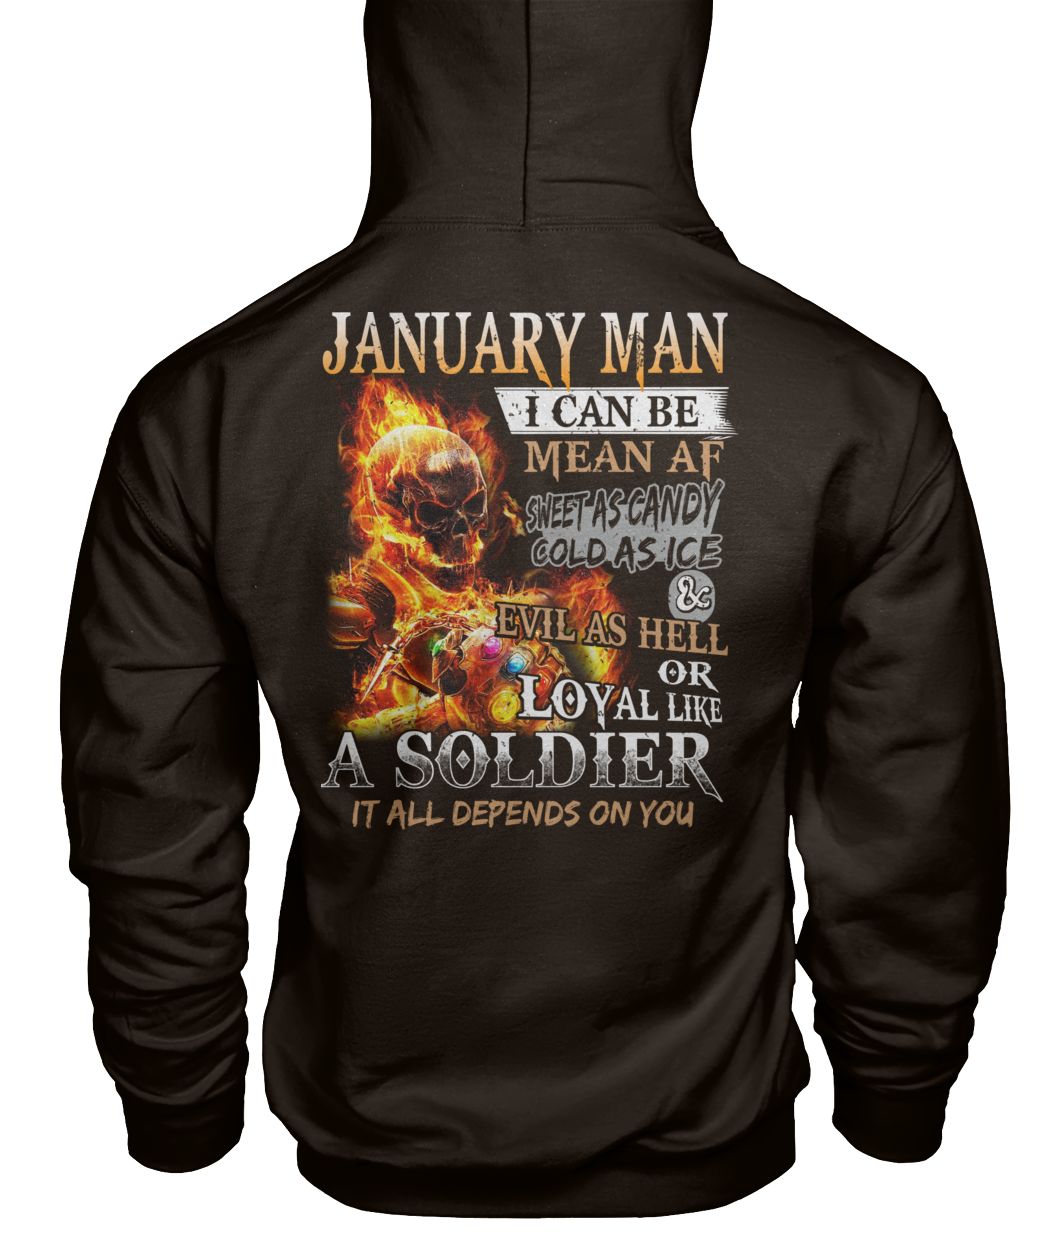 January man I can be mean af sweet as candy gold as ice and evil as hell gildan hoodie